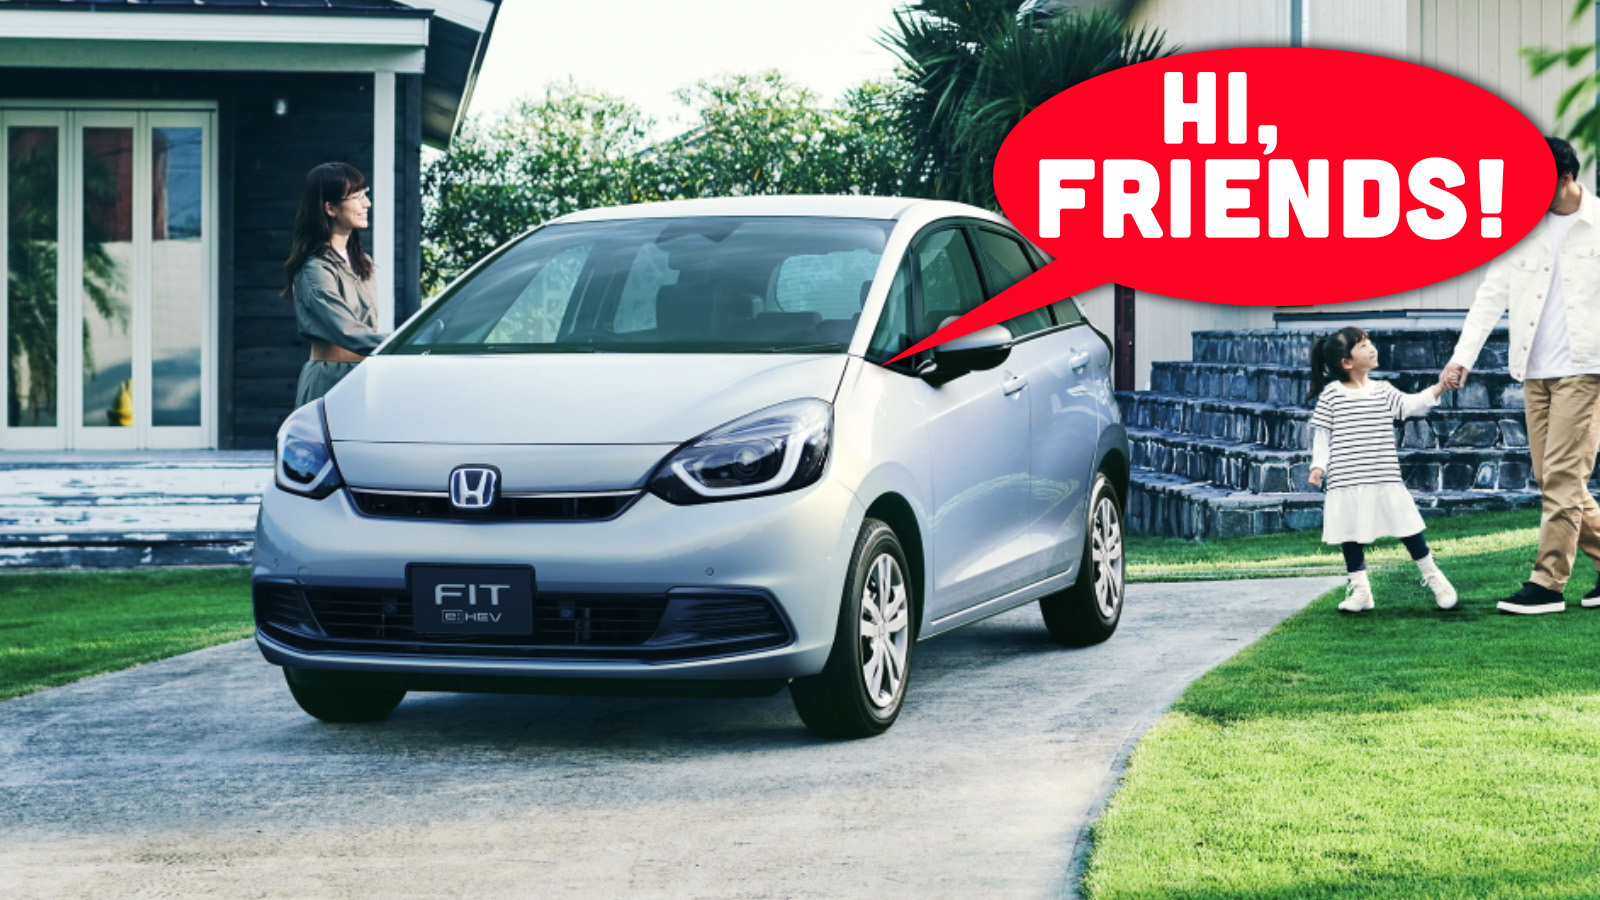 The 2023 Honda Fit Is Adorable Which Is Why I'm So Bummed America Won't Get  It - The Autopian